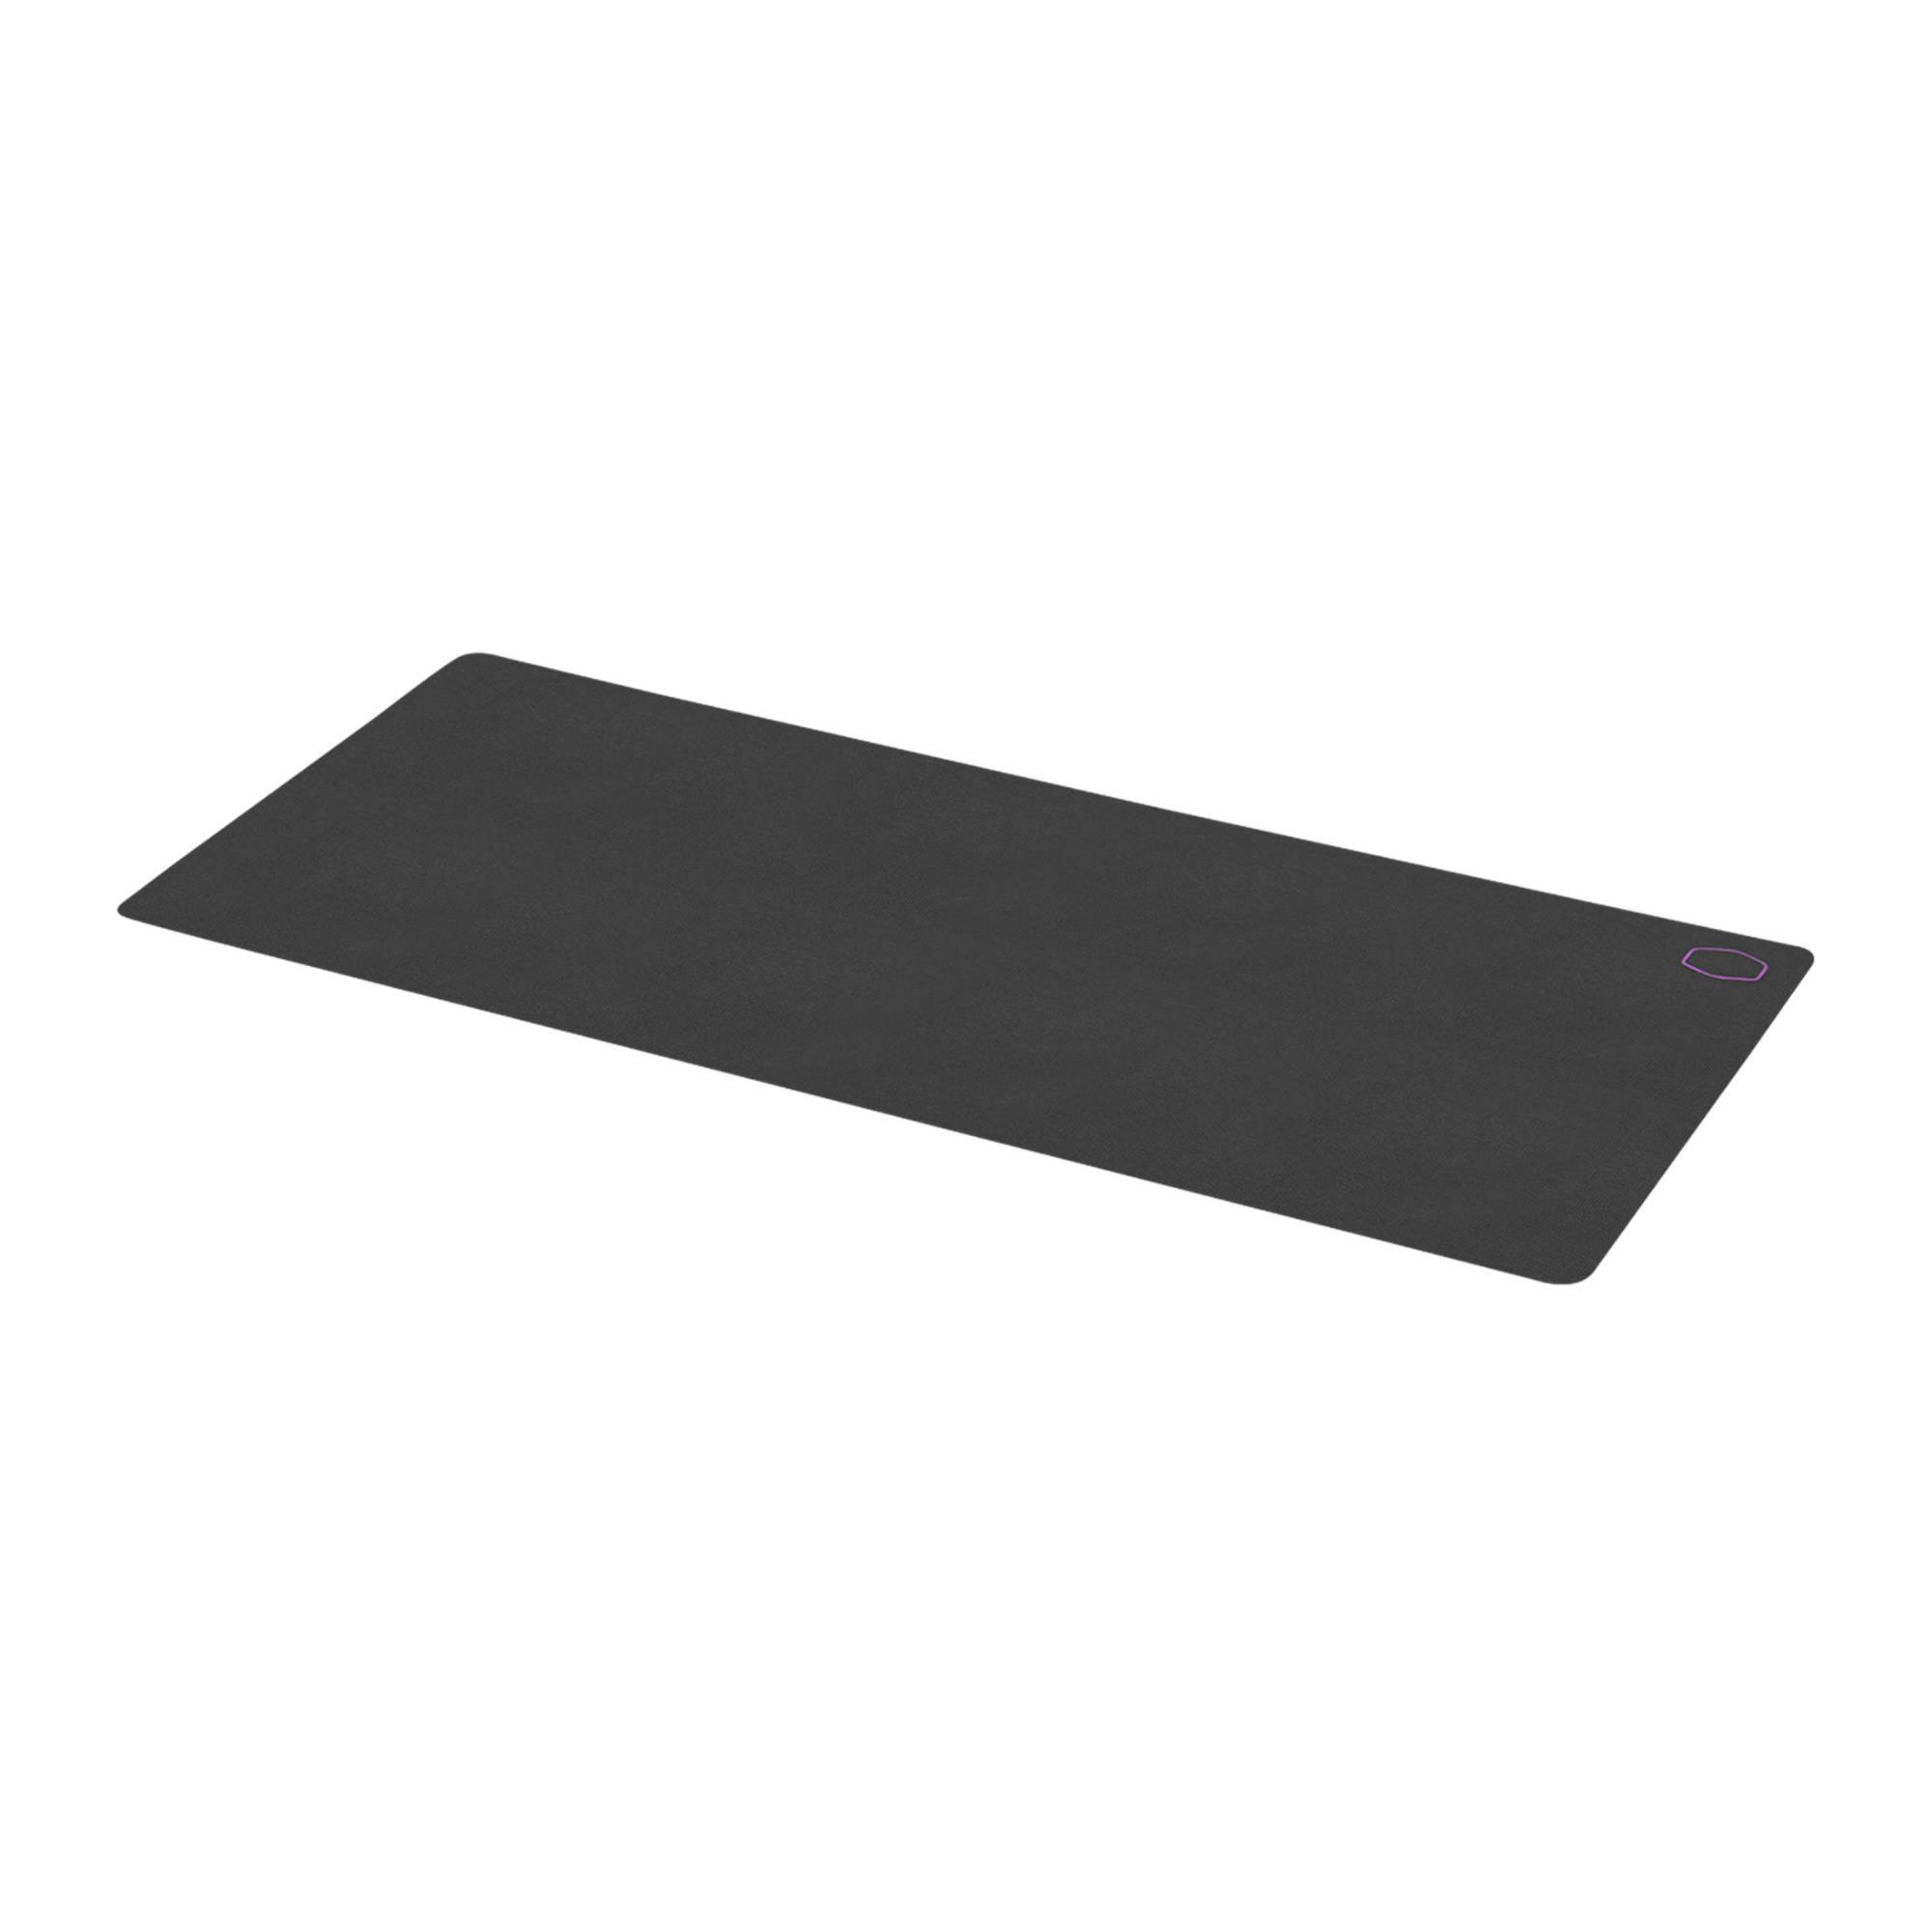 Cooler Master MP511 XXL Splash-Resistant Durable Gaming Mouse Pad with Anti-Slip Rubber Base (Black)